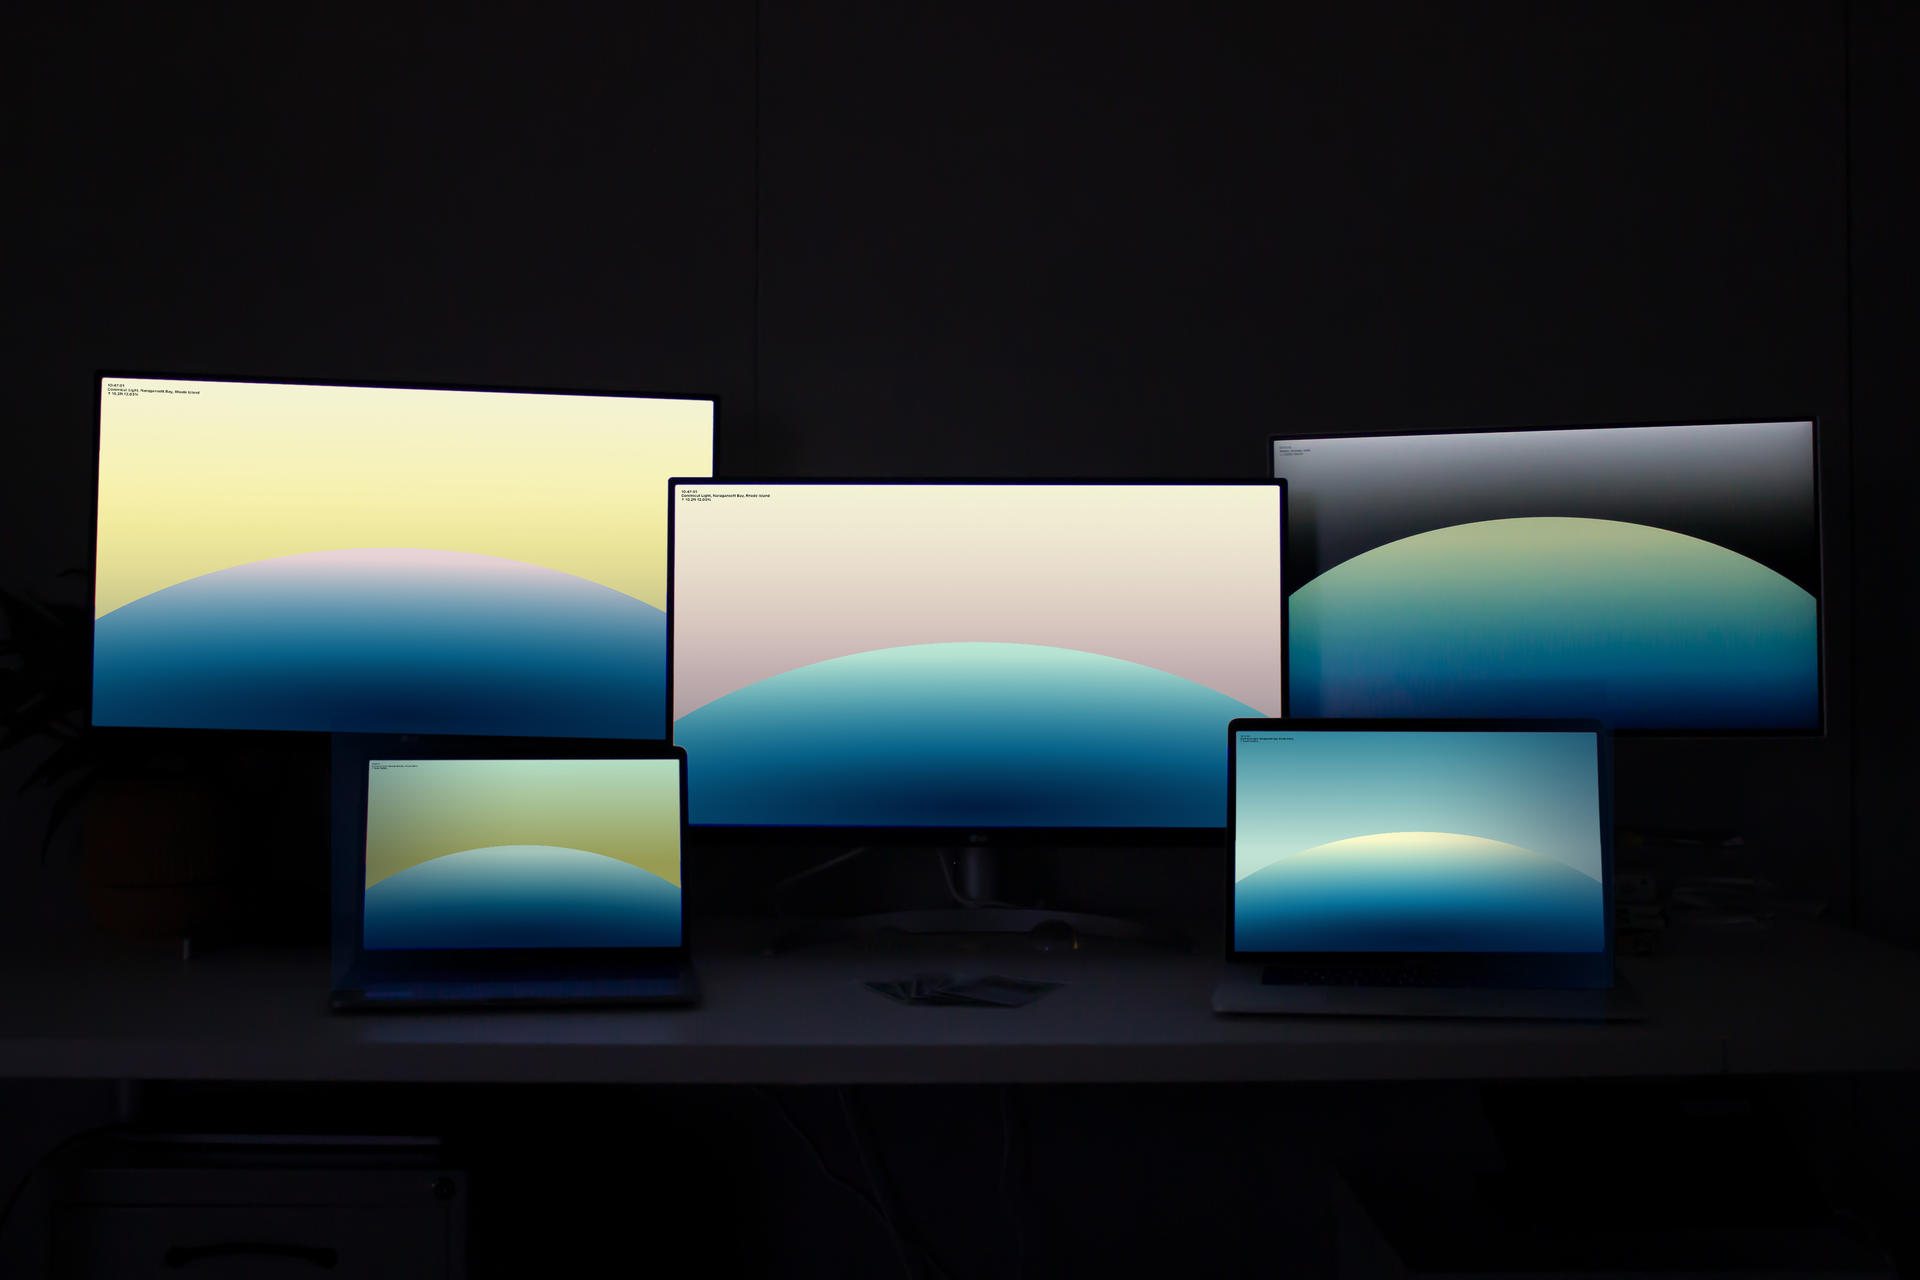 Five computer monitors of different sizes display a colorful screen saver design.